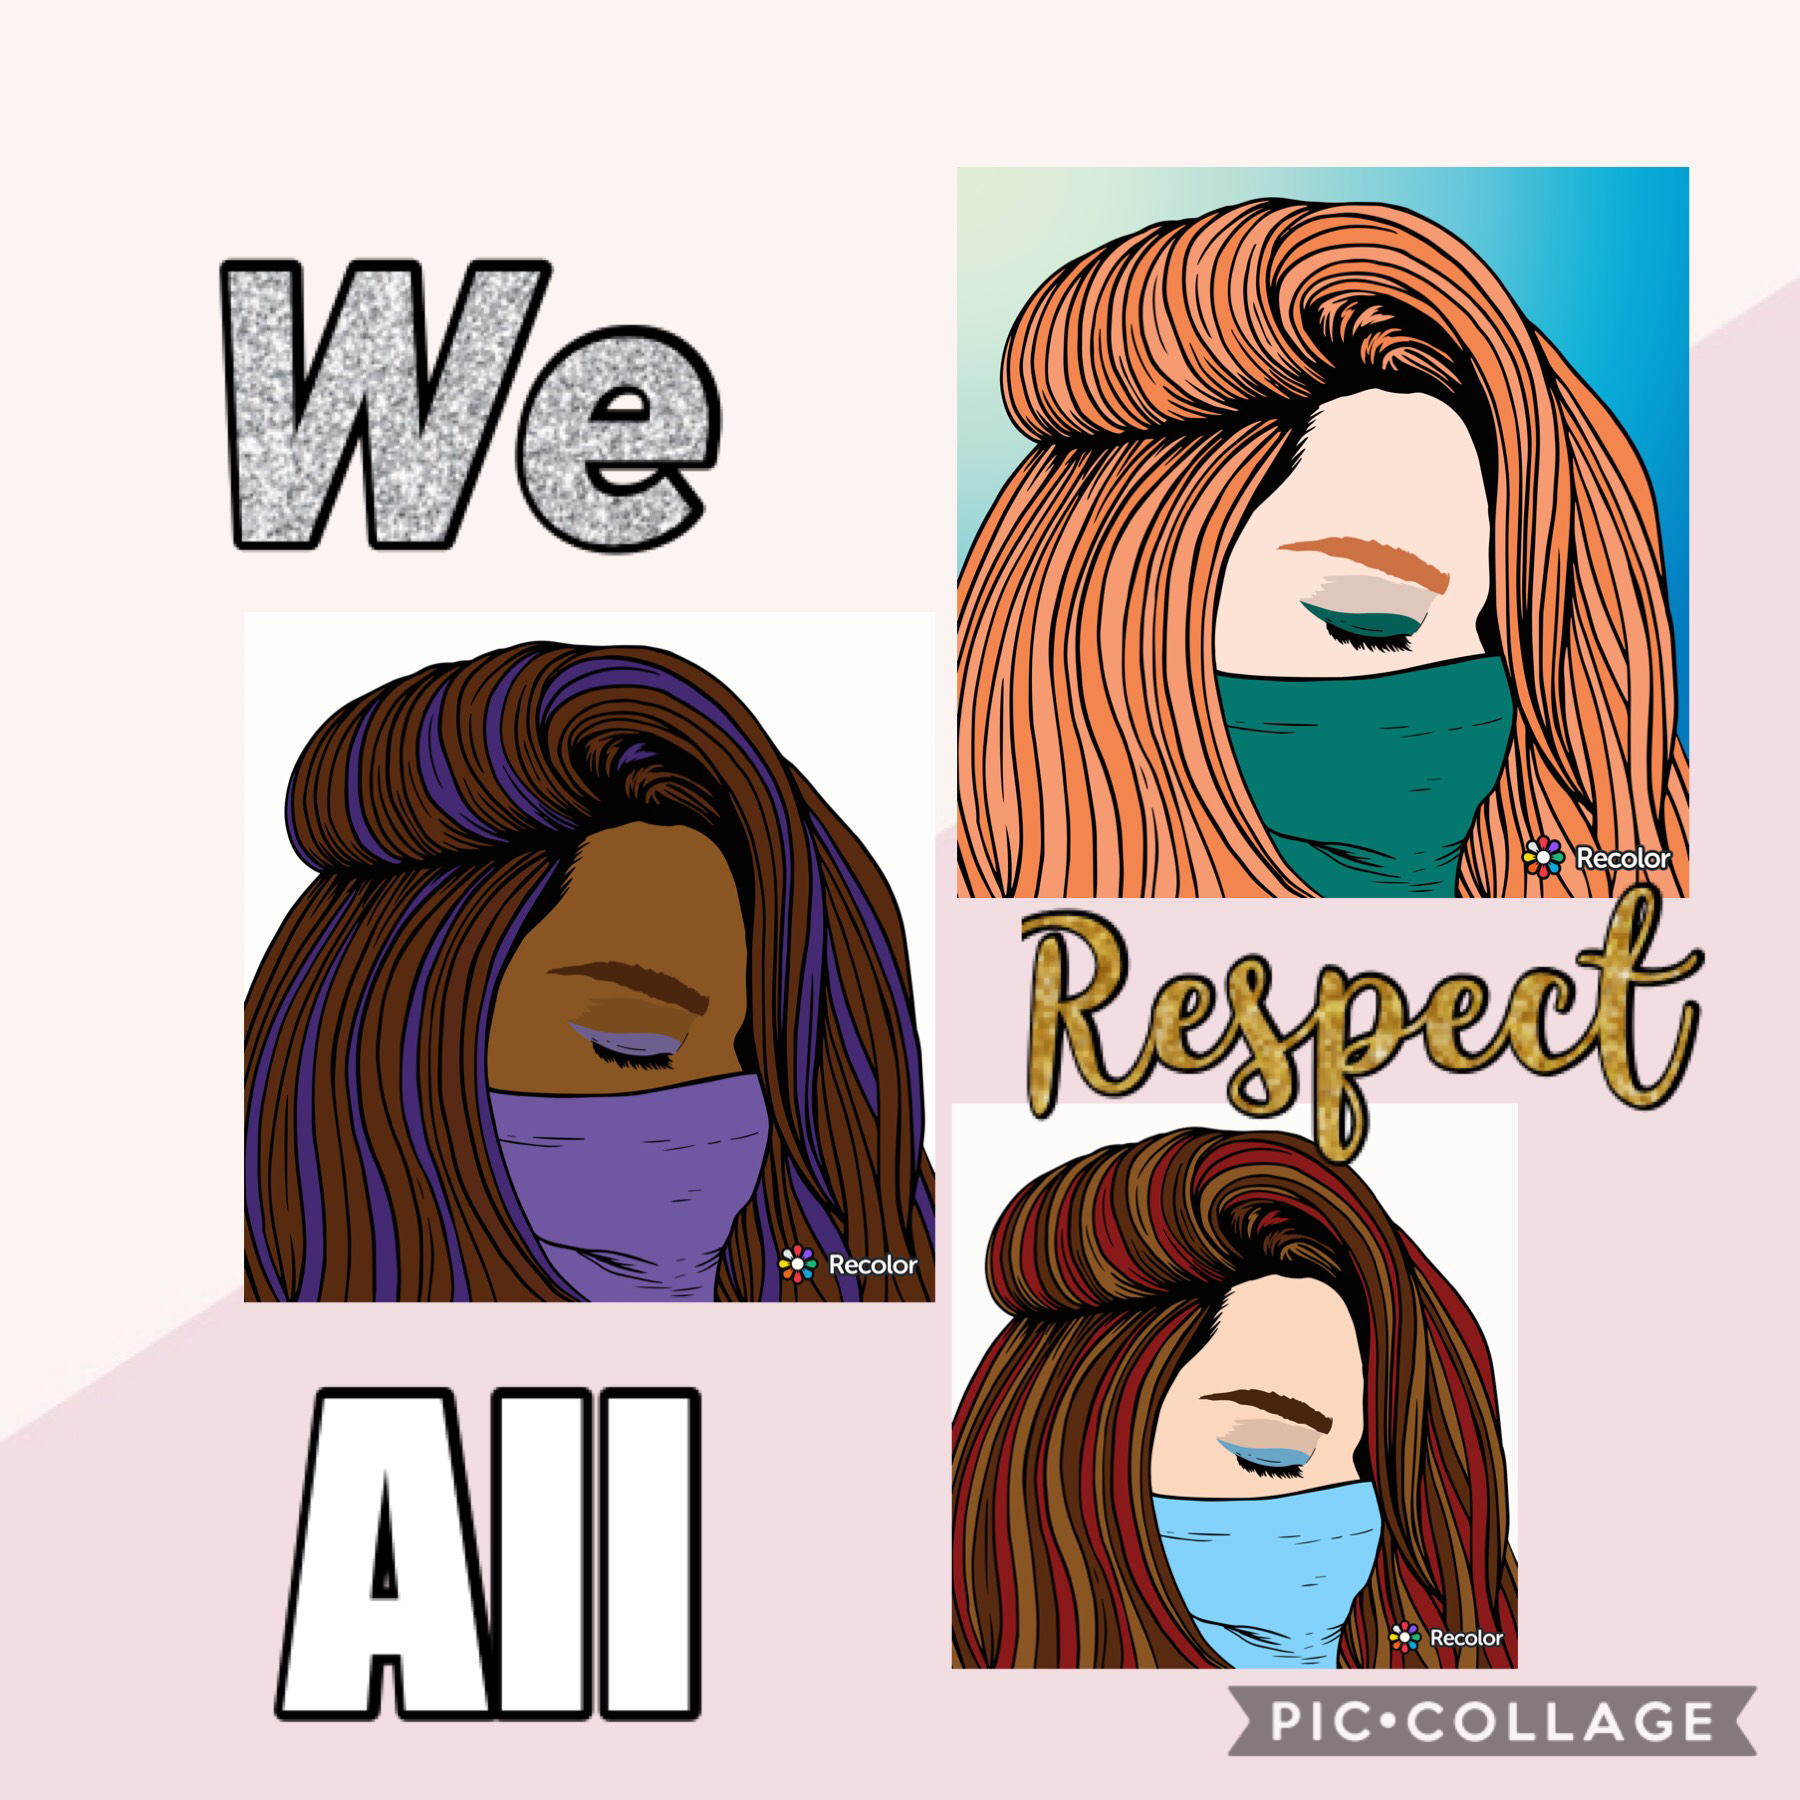 We respect all. No matter what. No matter what gender or race. #RespectAll